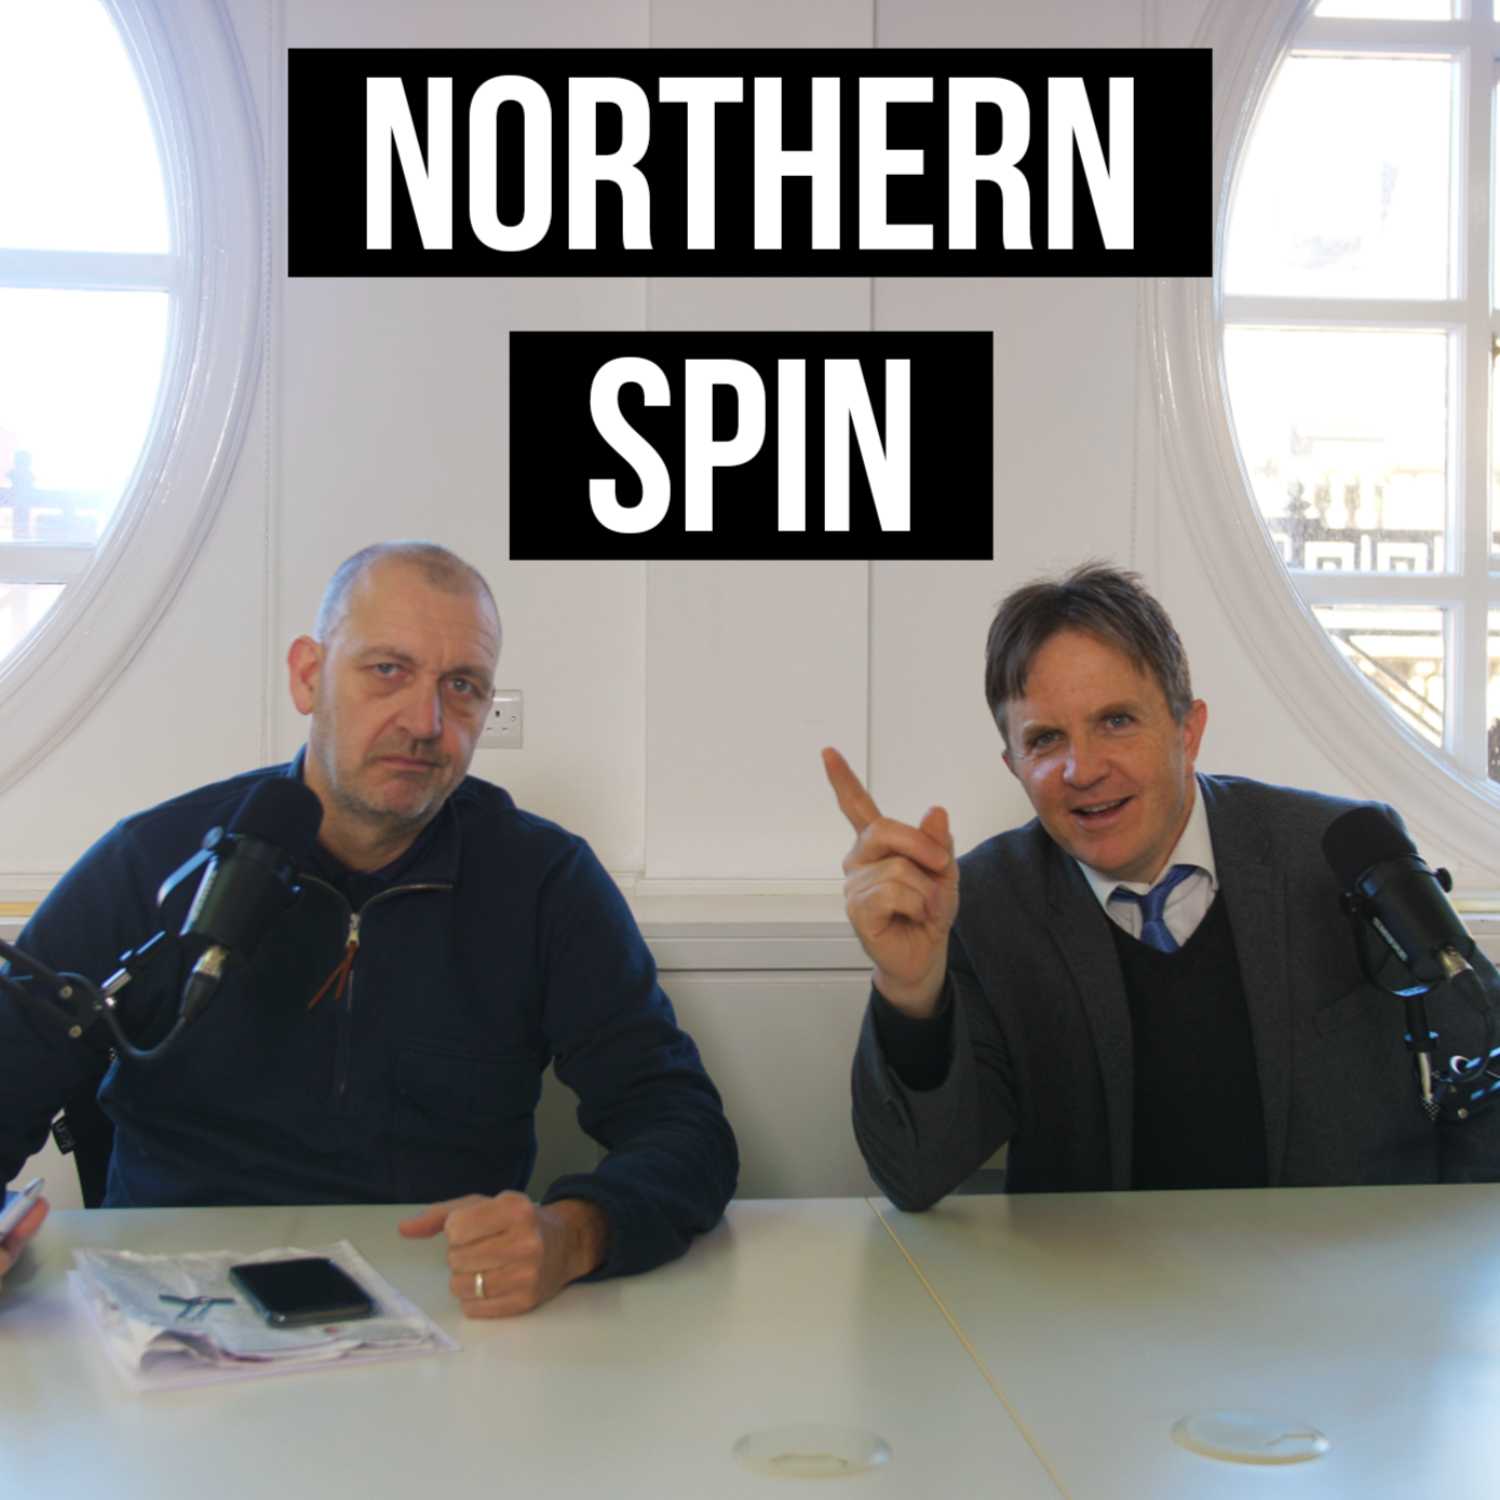 Northern Spin - Season 3 - Episode 10: End of Season Nailbiter! Local Elections, Doctors Strike, Succession Issues!